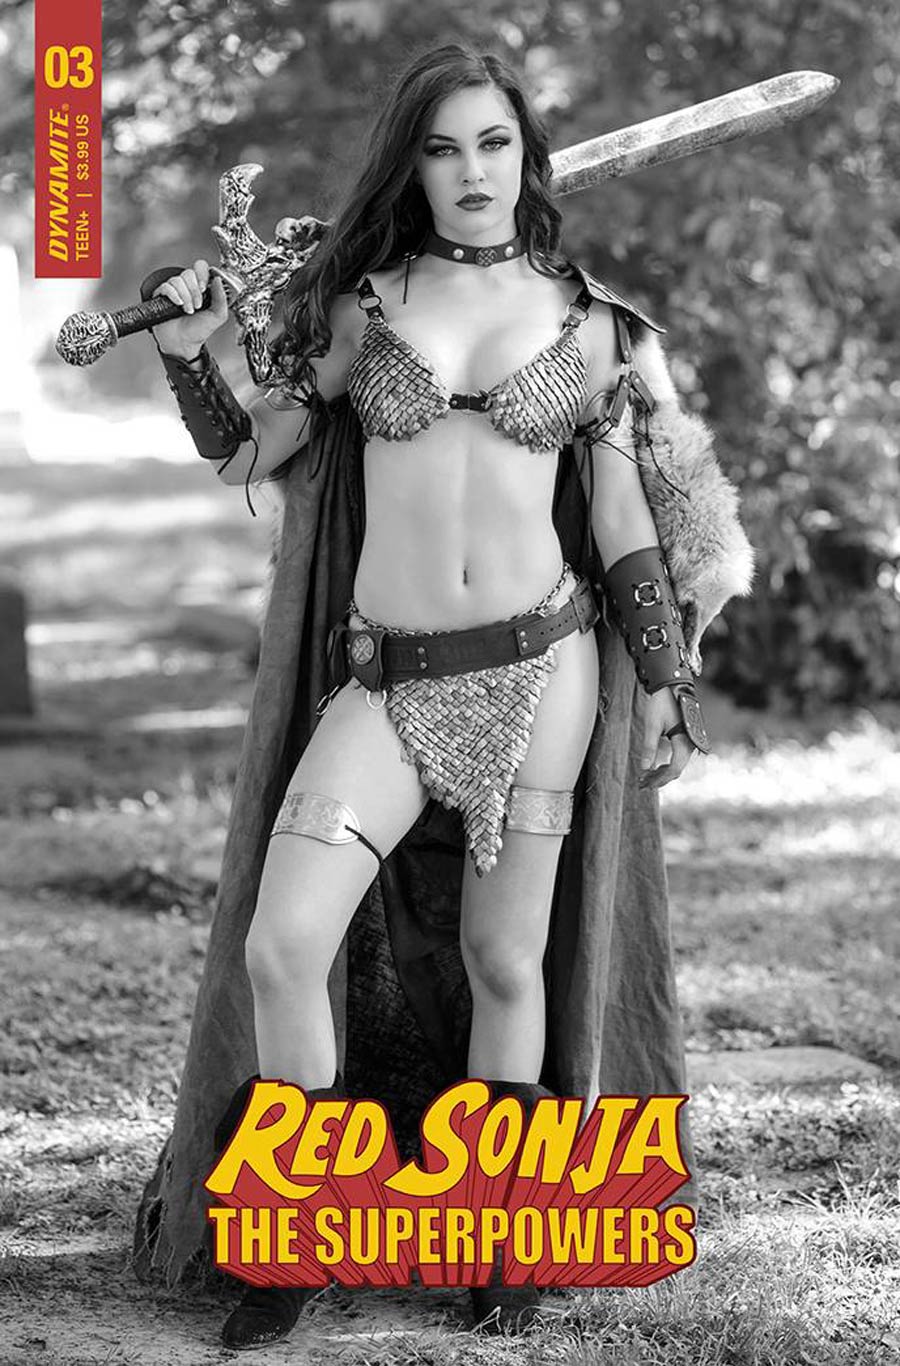 Red Sonja The Superpowers #3 Cover F Variant Savannah Polson Cosplay Photo Black & White Premium Cover